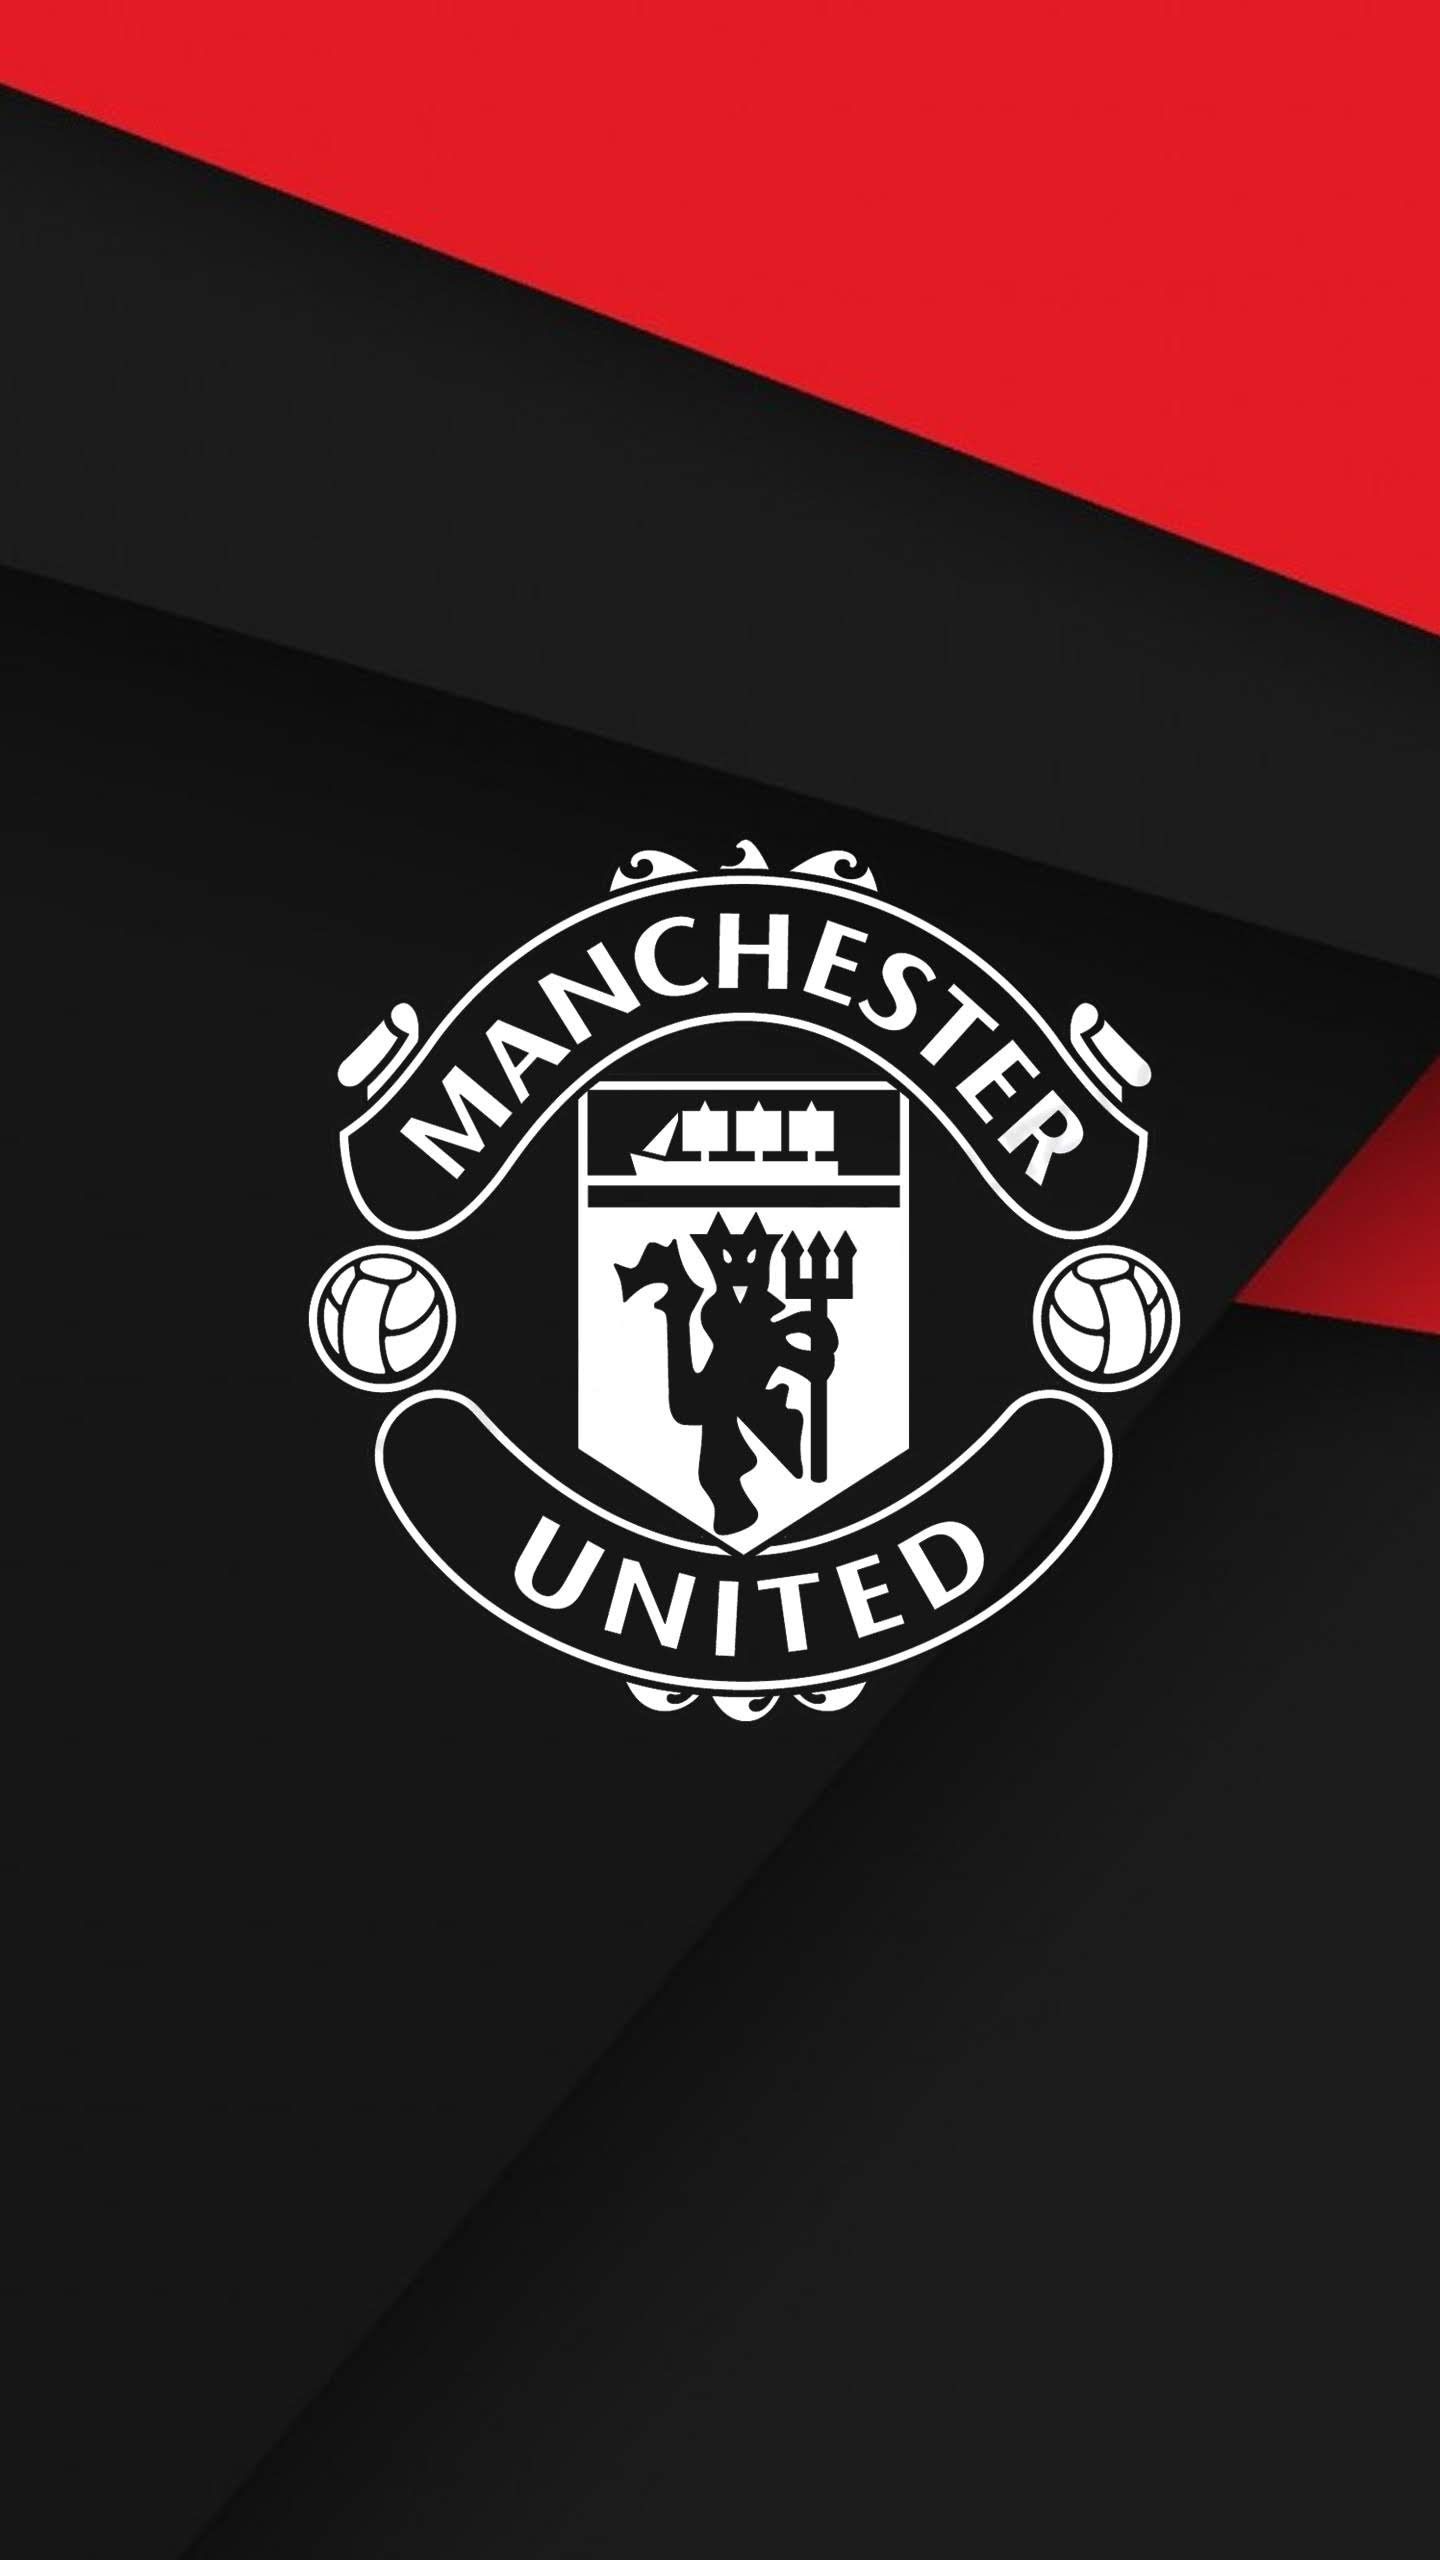 manchester united 3d wallpaper is high definition wallpaper you can Manchester united wallpaper Manchester united logo Manchester united wallpapers iphone